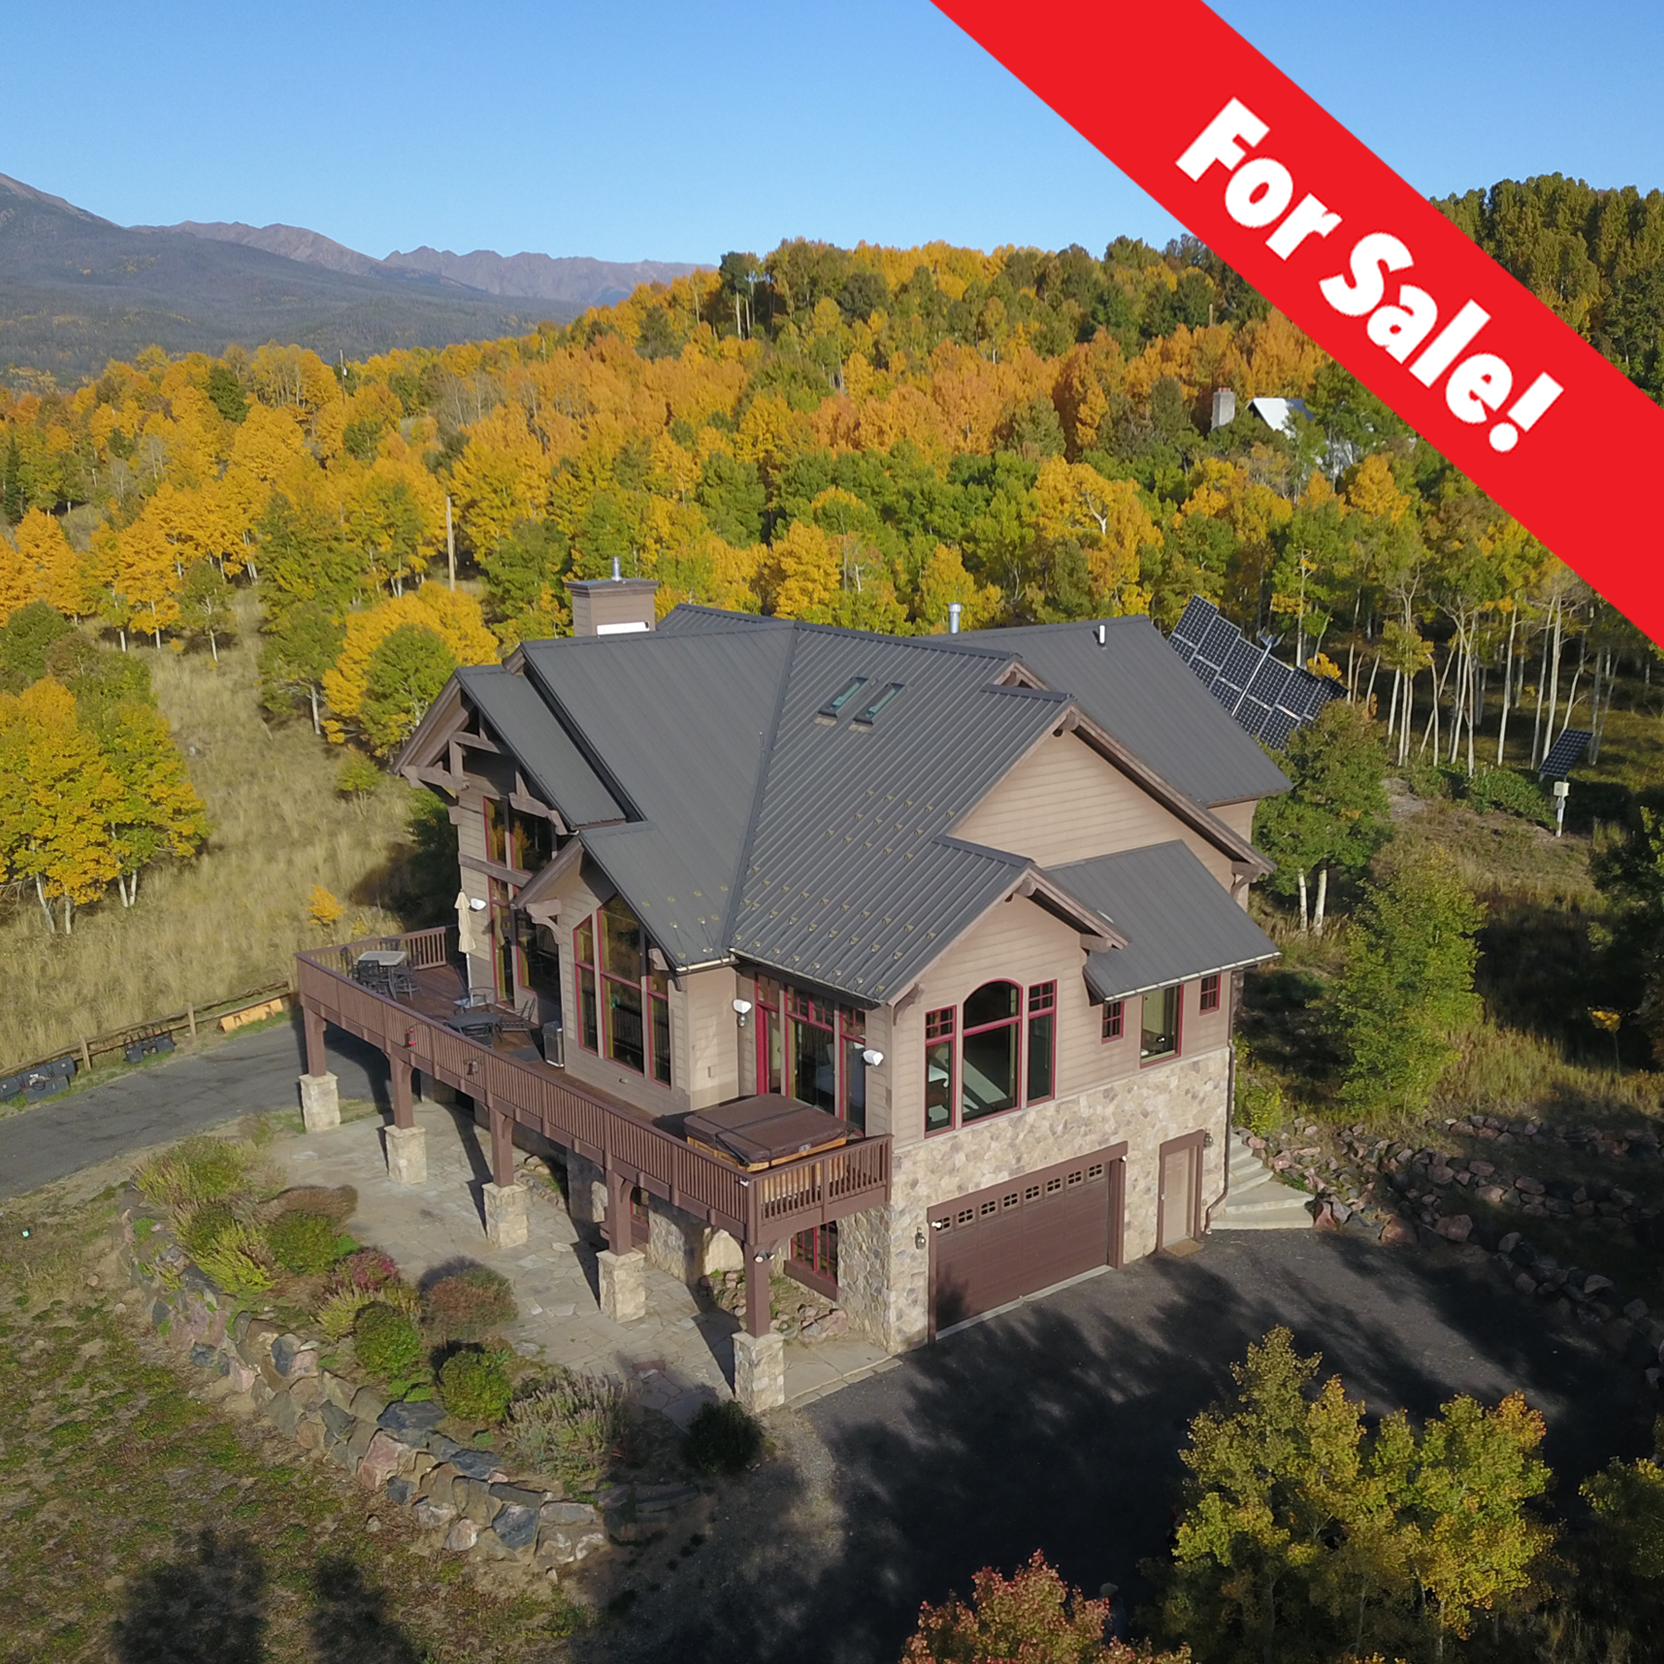  Welcome to the Top of the World! An iconic Silverthorne residence offering jaw-dropping panoramic views of Lake Dillon, the Ten Mile Range and the Gore Range. Situated on over two acres and adjacent to the Ptarmigan Trail, the unique natural setting